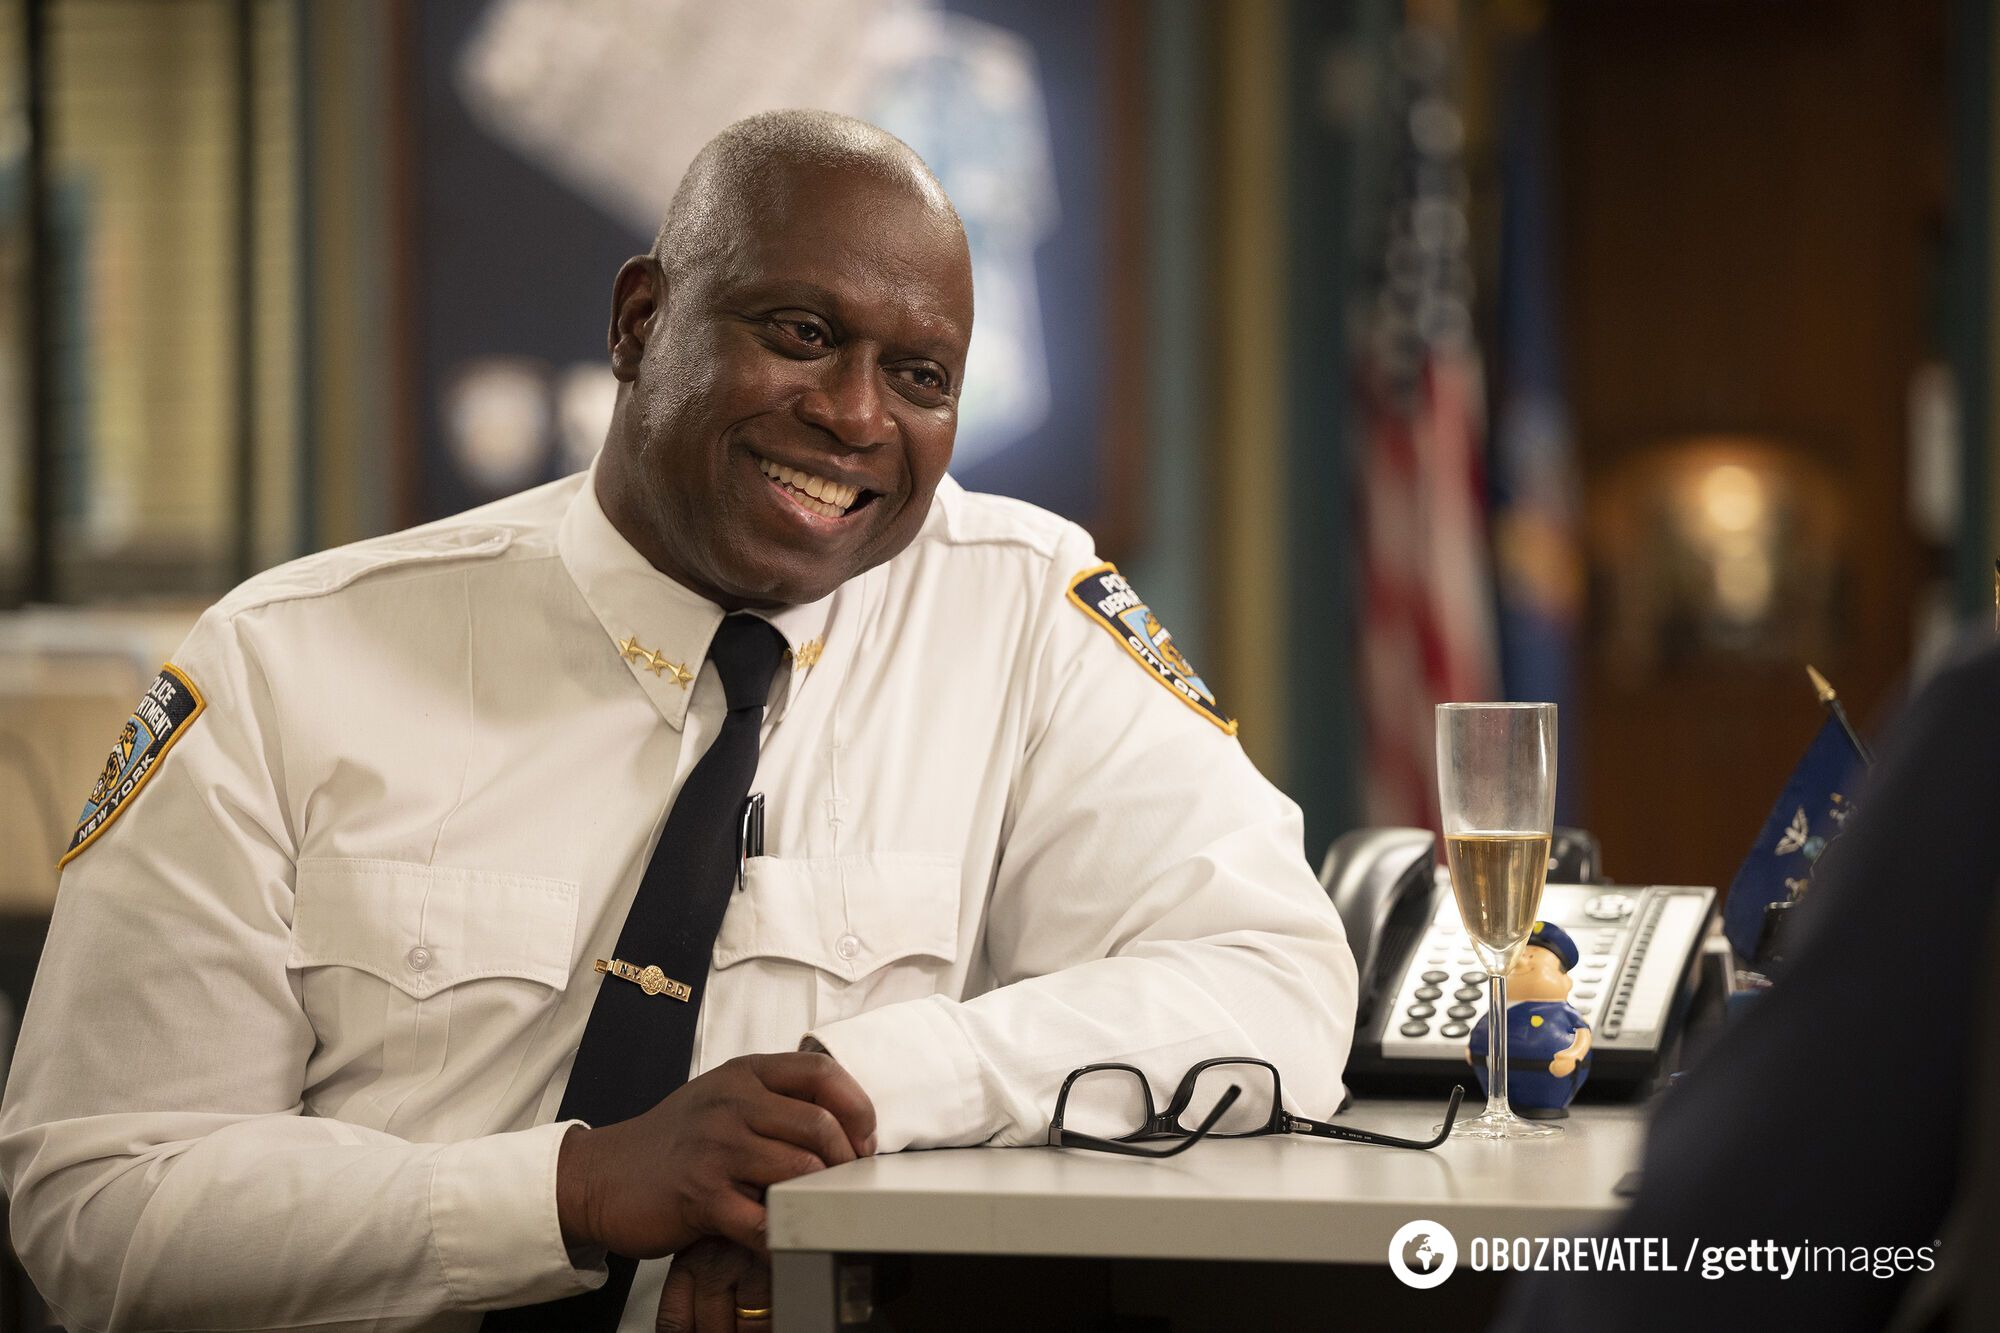 House M.D and Brooklyn Nine-Nine star Andre Braugher passed away